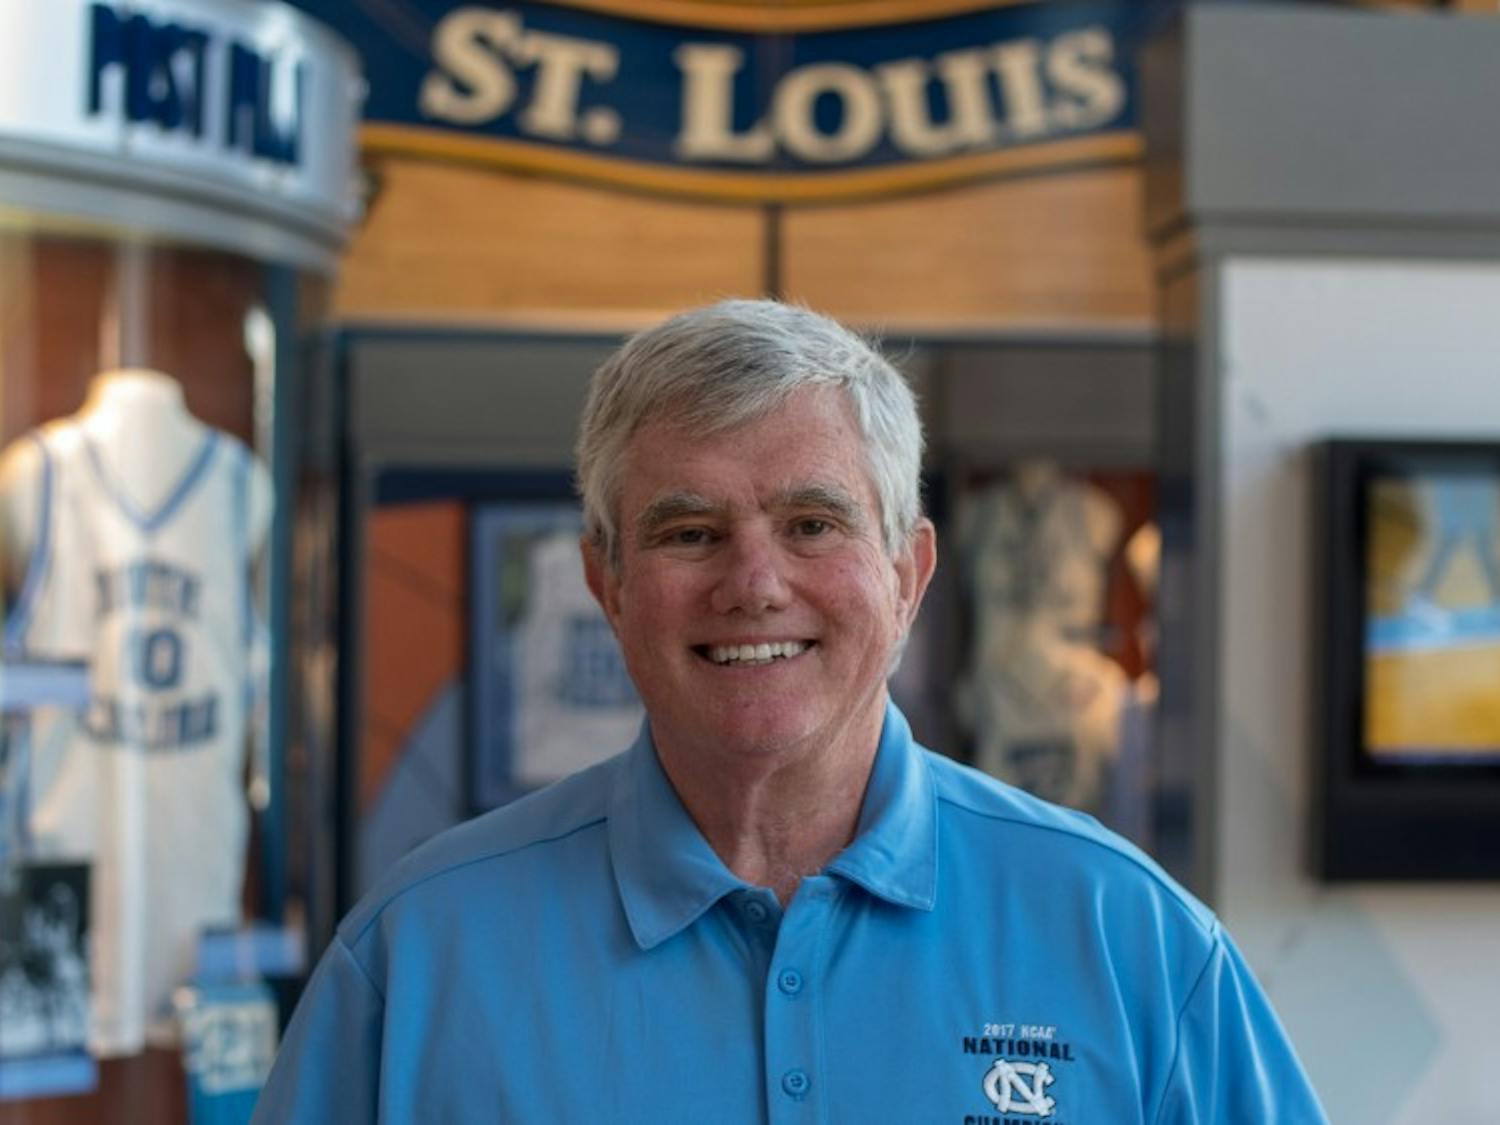 Bob Ward stands inside the Carolina Basketball Museum where he has worked as an attendant and greeter since 2008. Ward is a lifelong resident of Chapel Hill and has been a regular usher at UNC basketball games for 35 years.